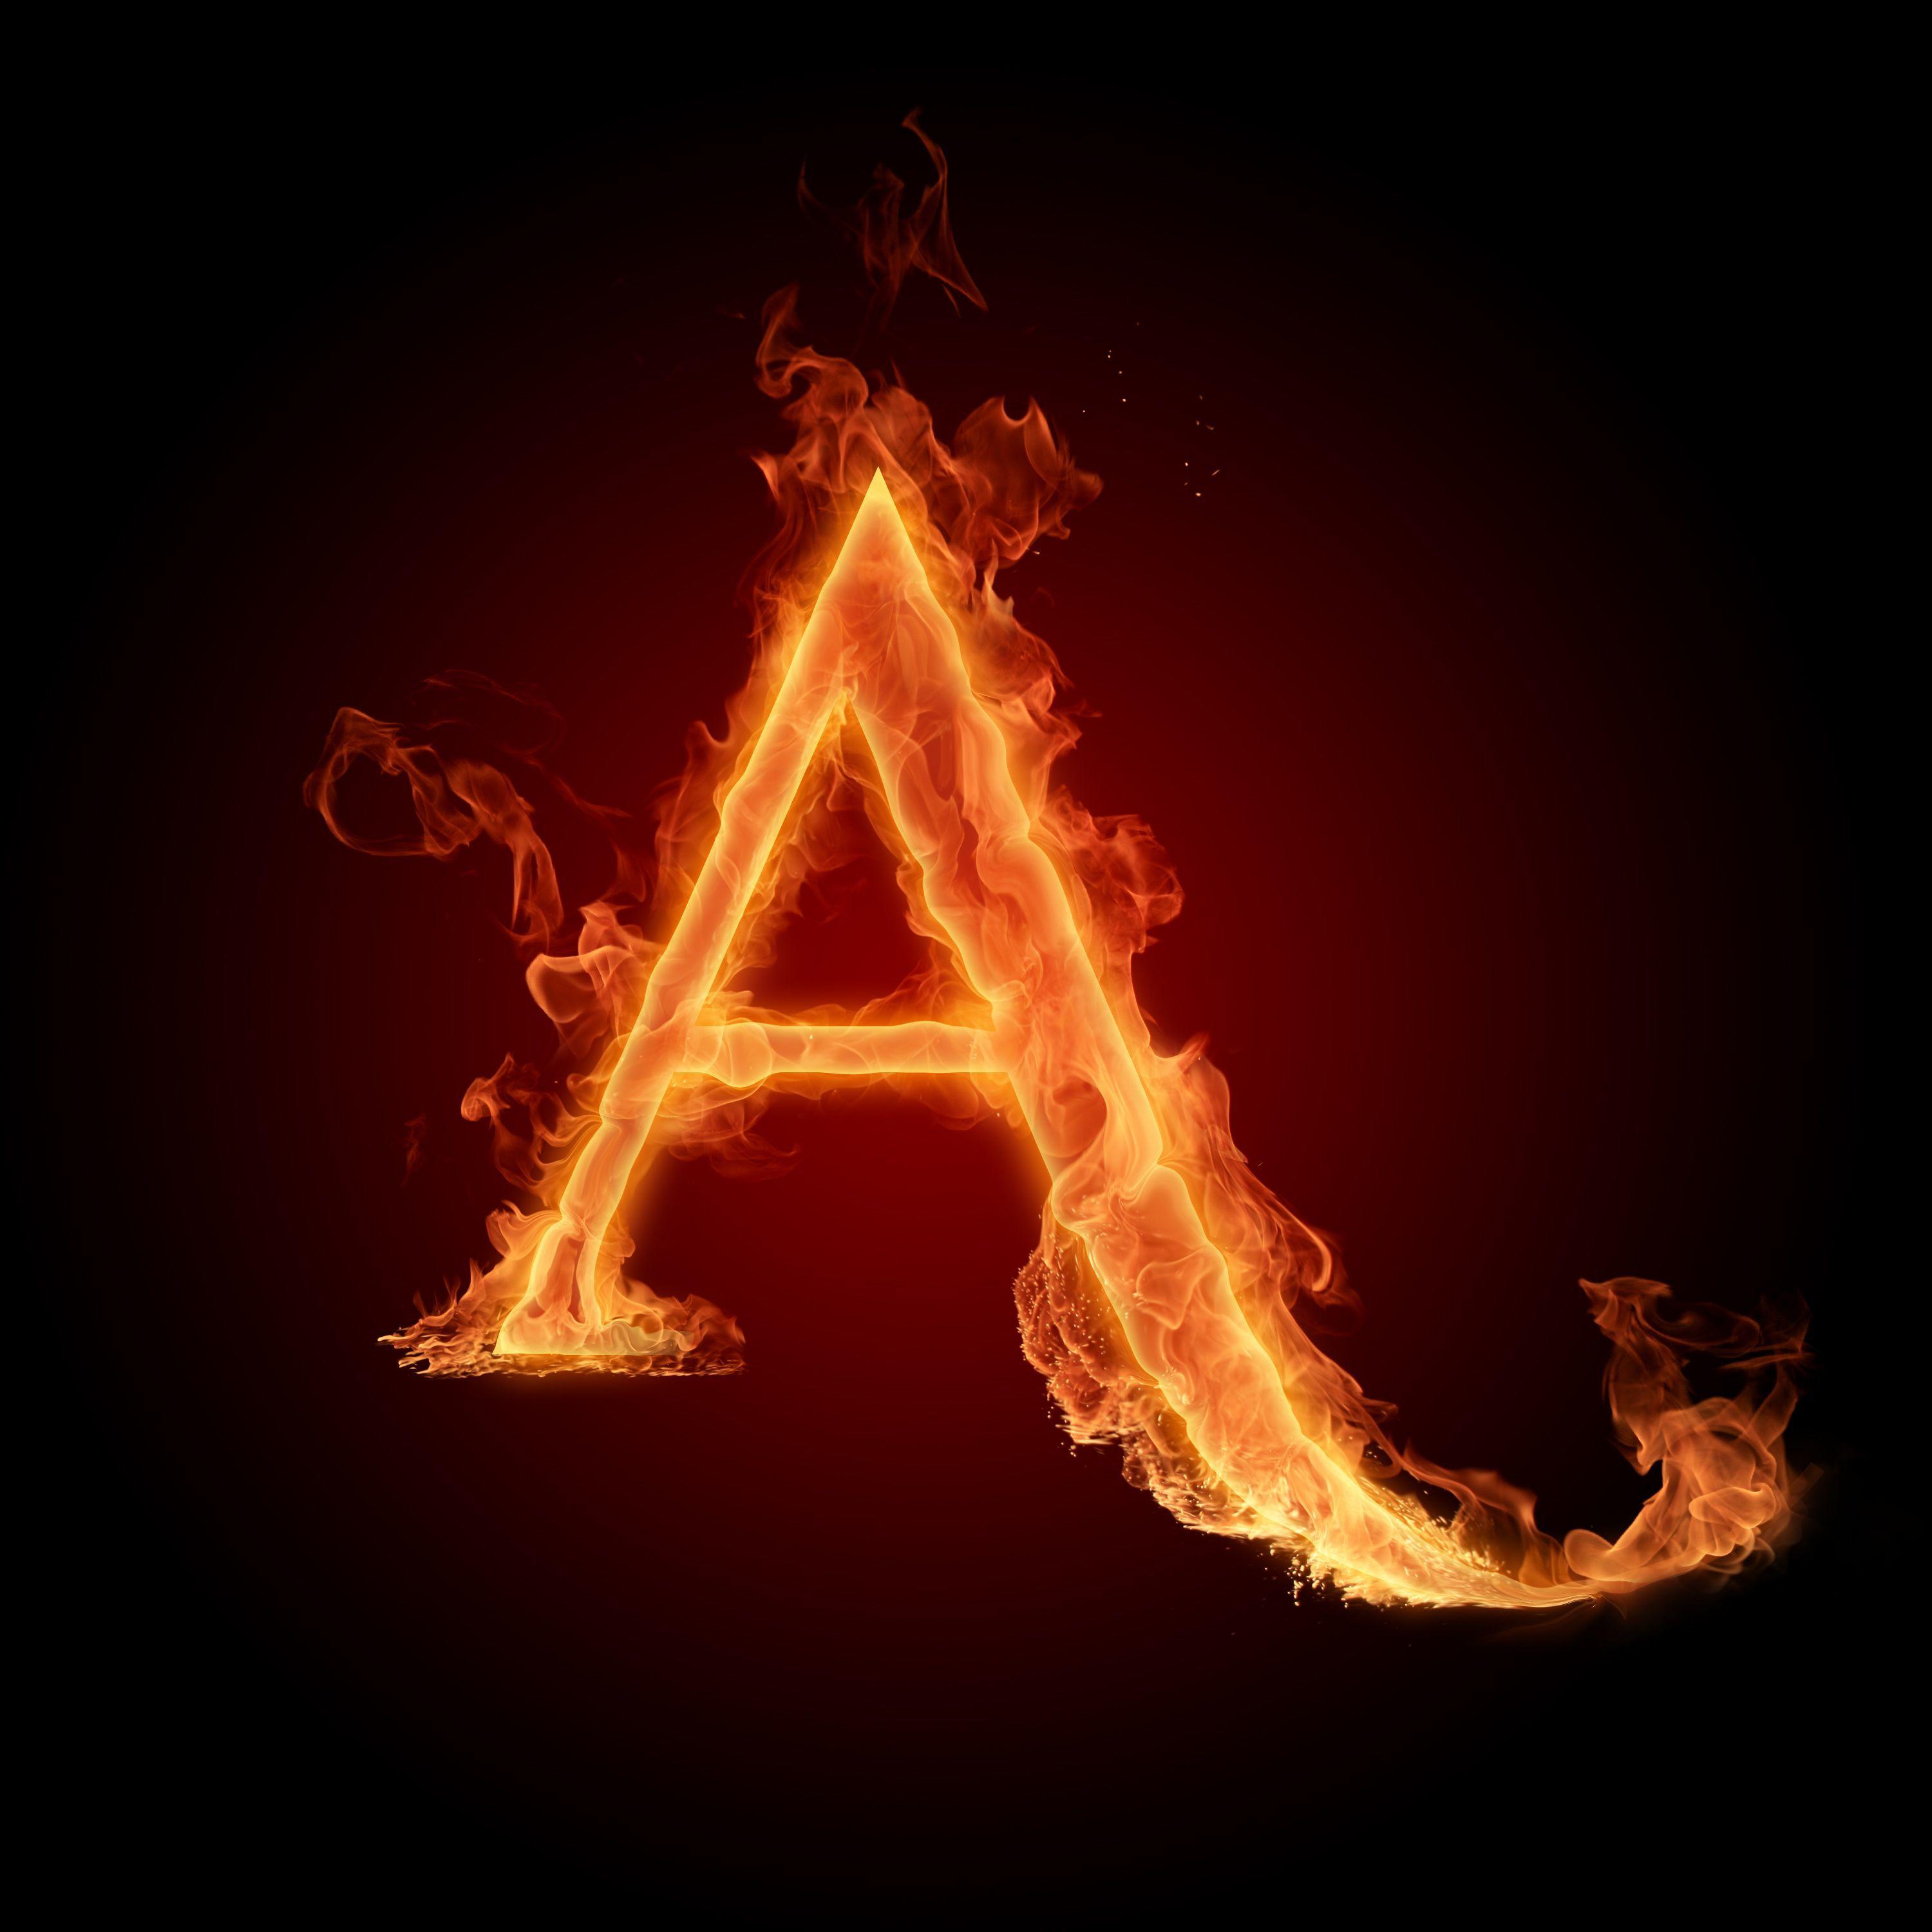 letter a wallpapers hd